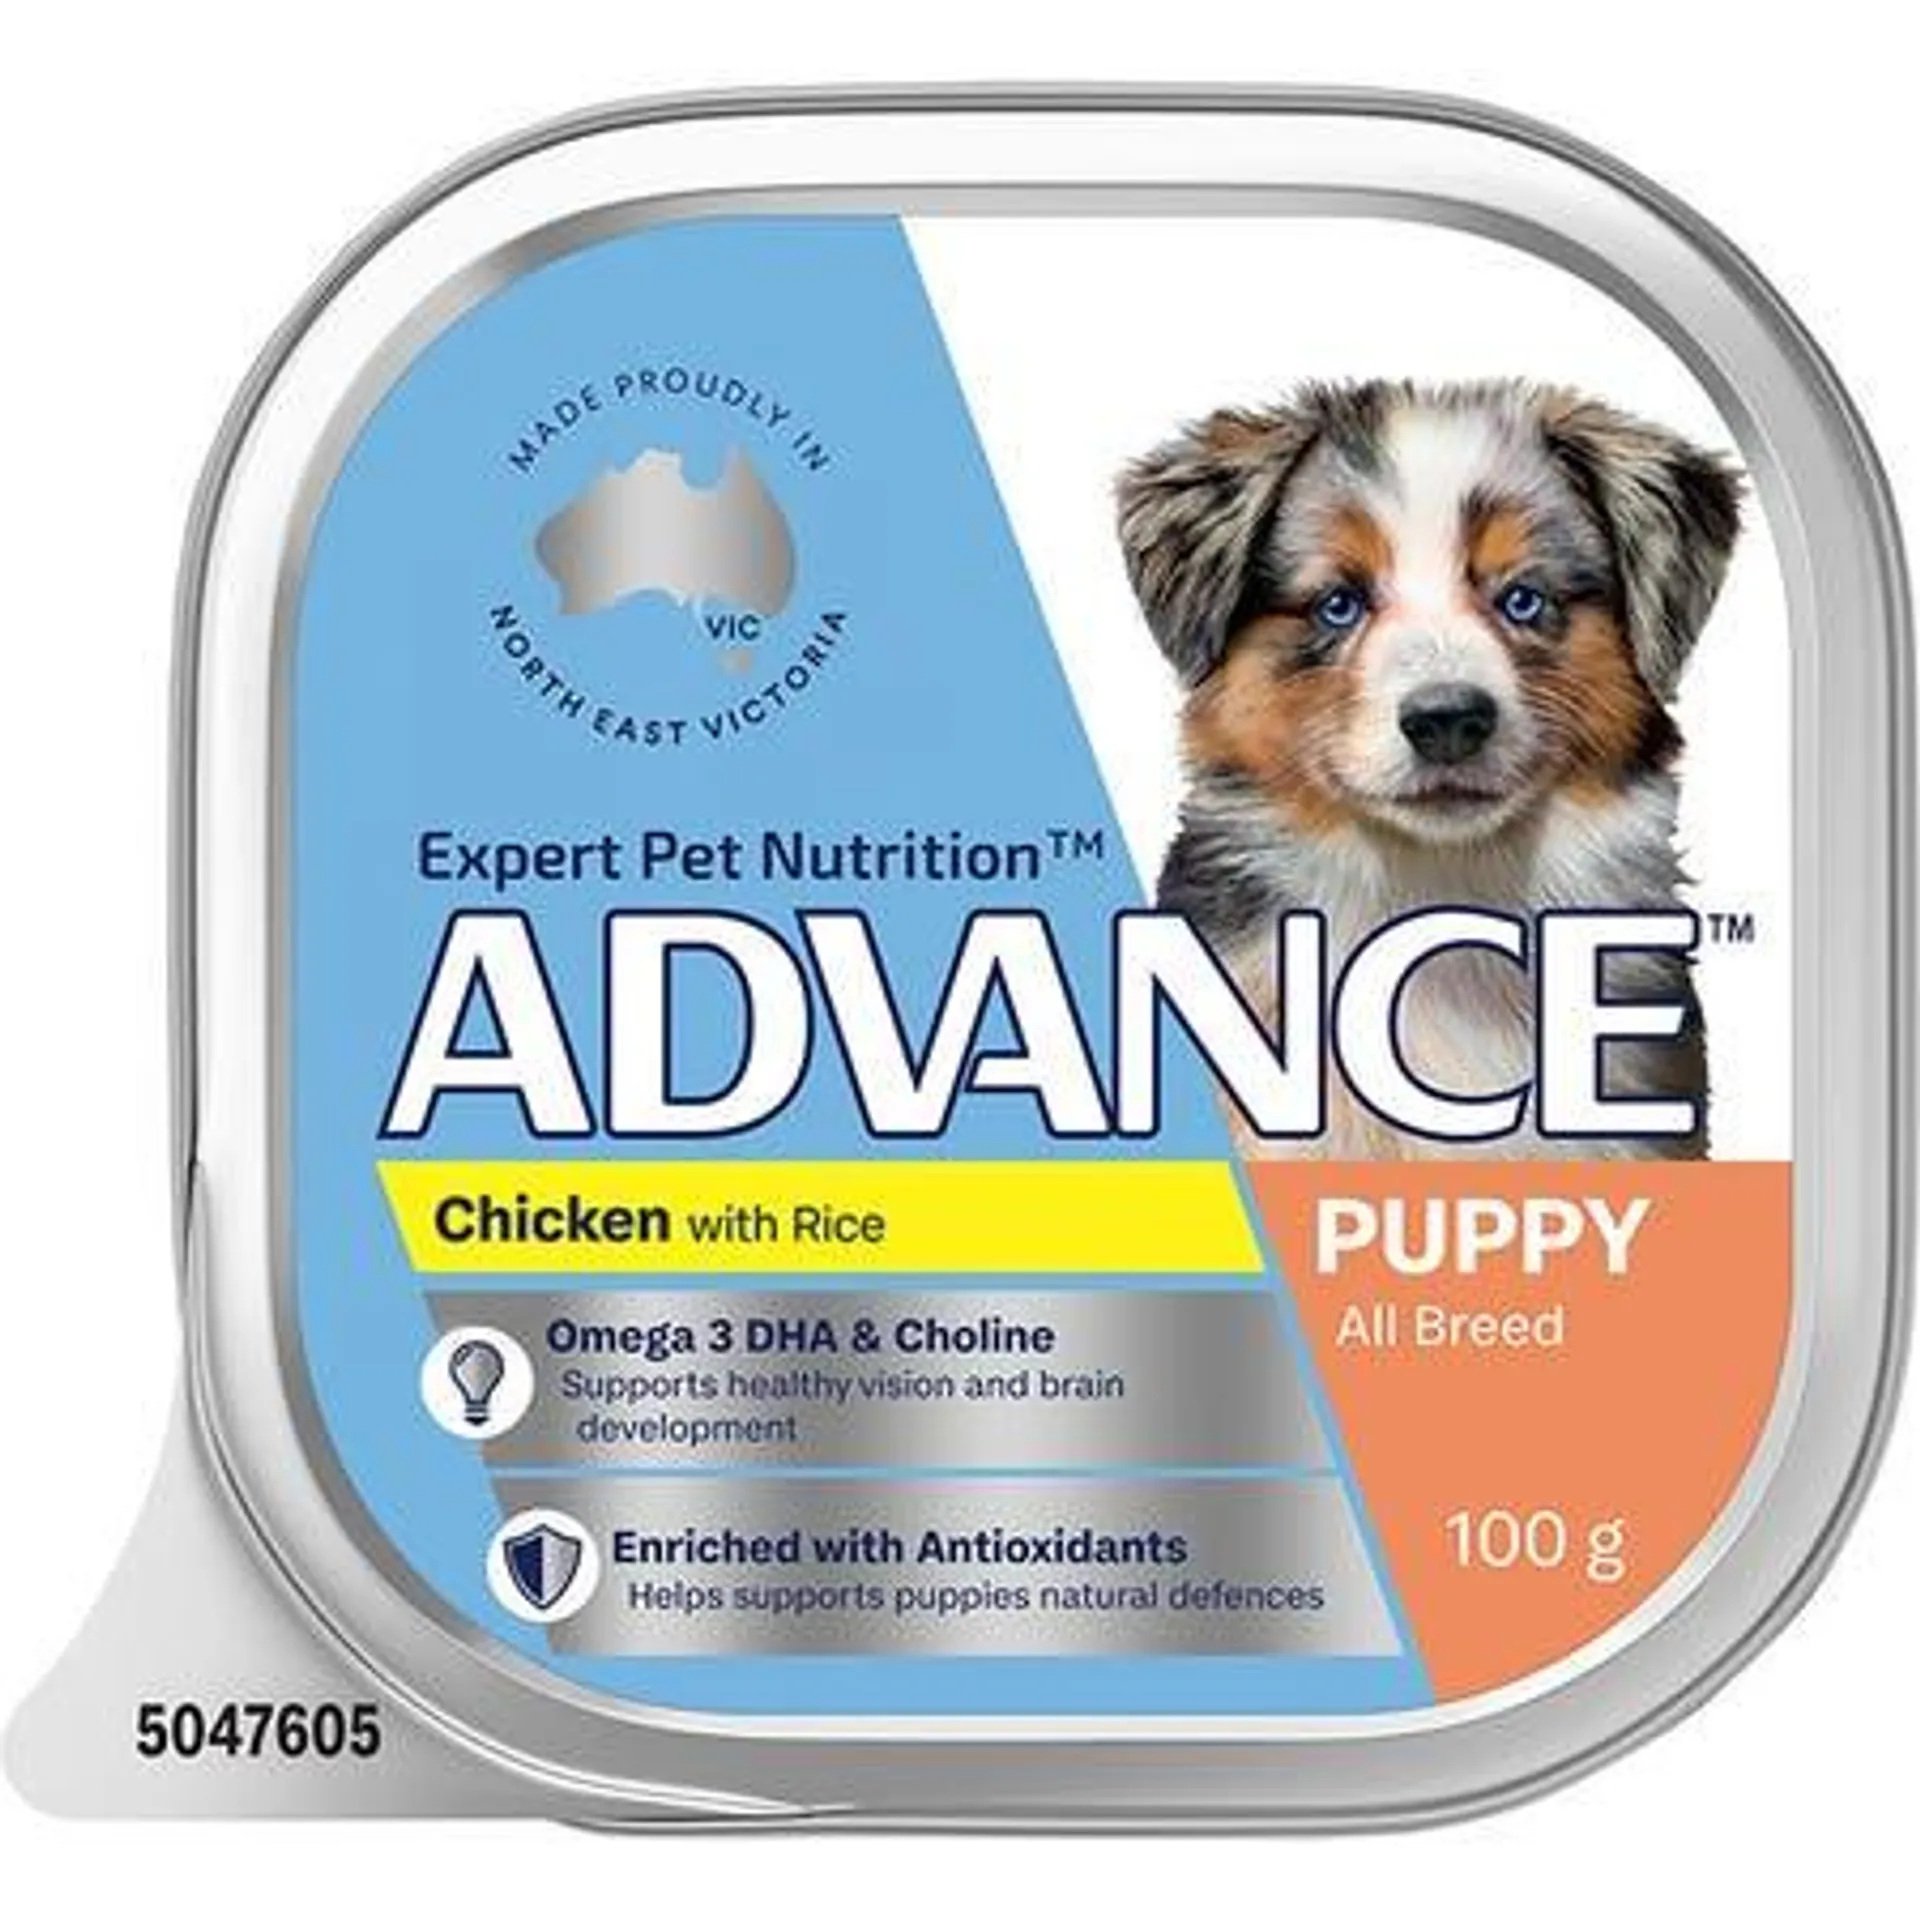 ADVANCE Puppy All Breed Wet Dog Food Chicken with Rice 12x100g Trays